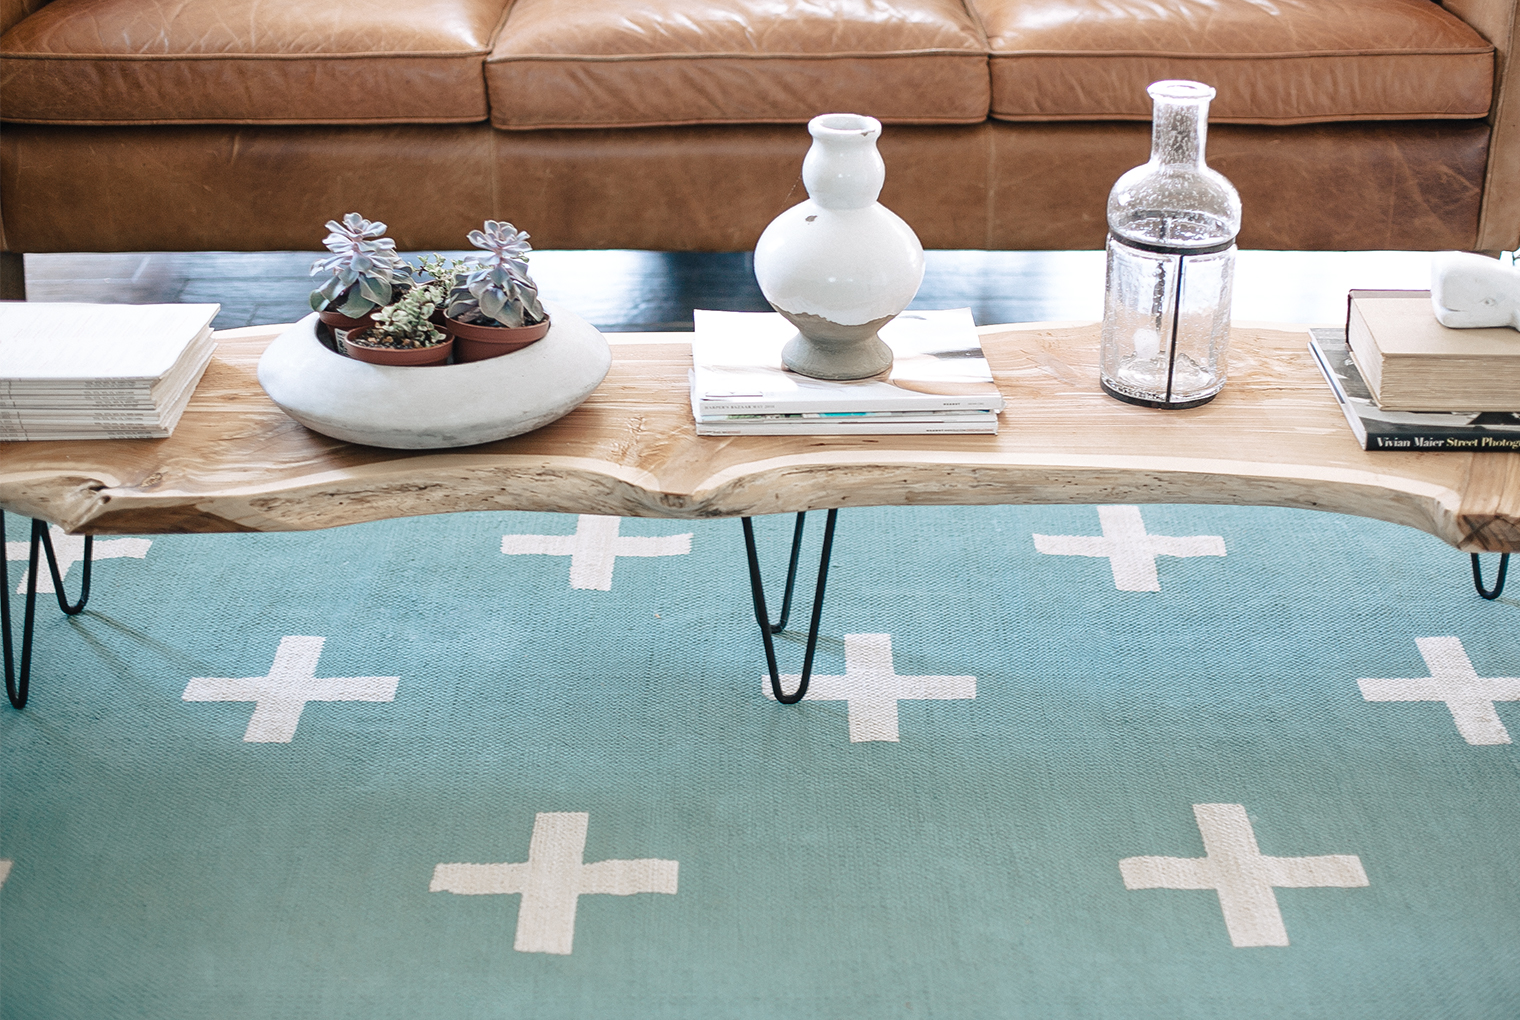 DIY-Painted-Patterned-Rugs-Project-How-To-8